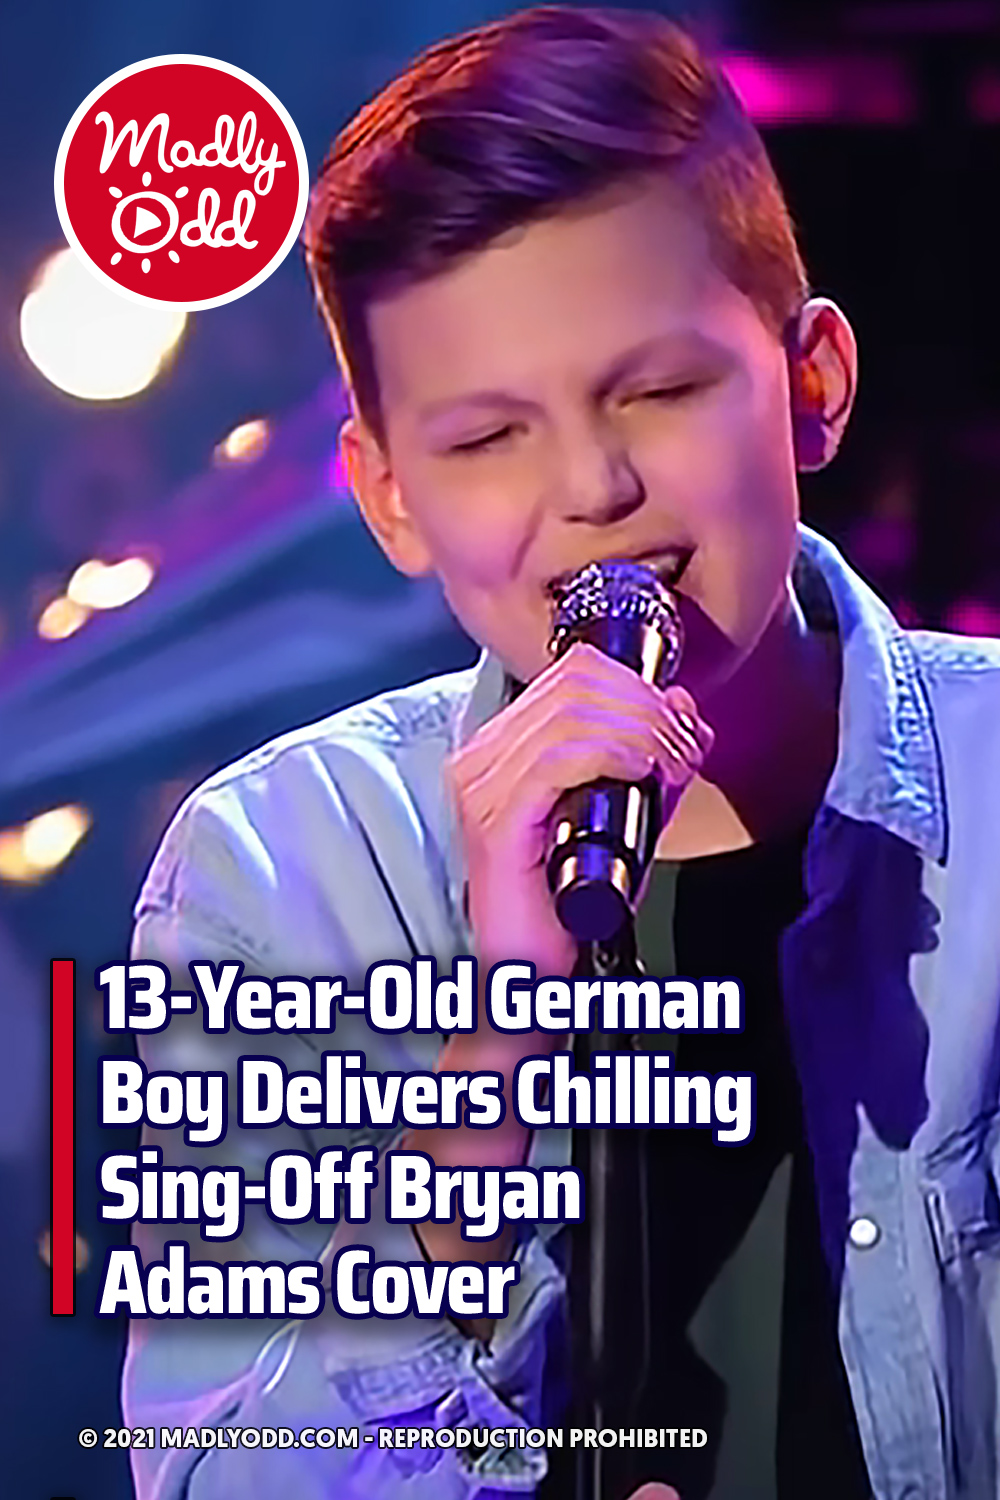 13-Year-Old German Boy Delivers Chilling Sing-Off Bryan Adams Cover